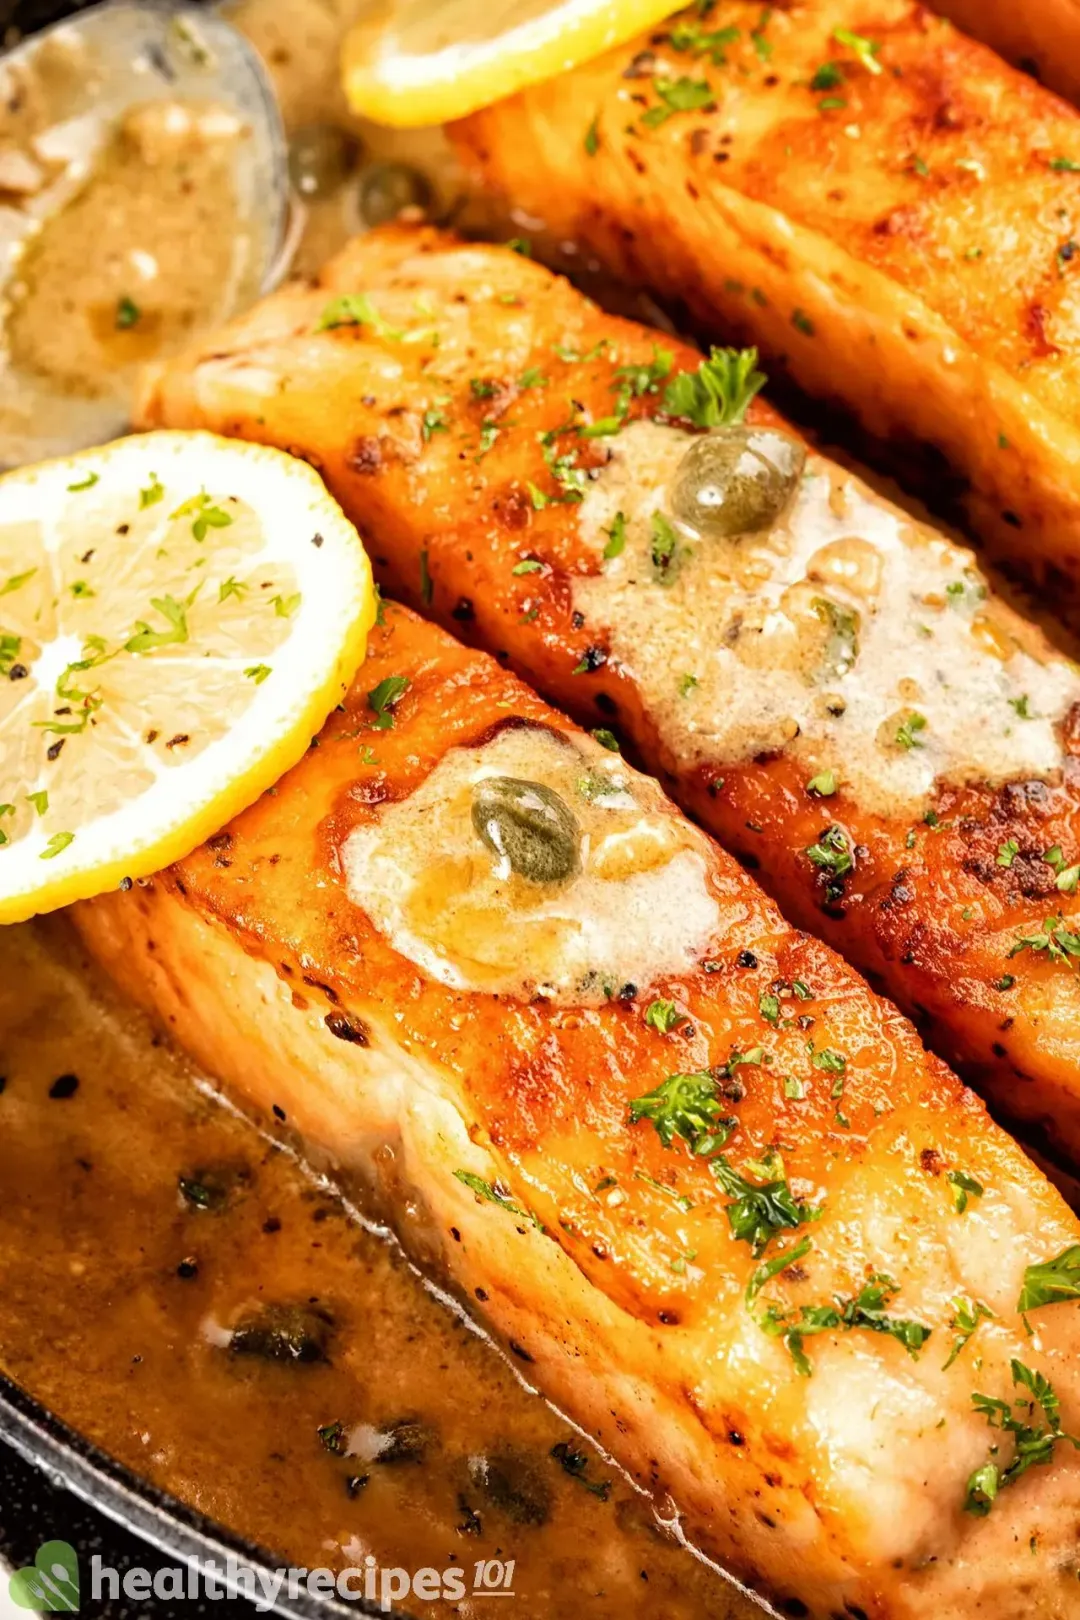 A close-up view of goldenly seared salmon filets sitting in a cooking juice, on top of which there are capers, lemon slices, and a creamy sauce.